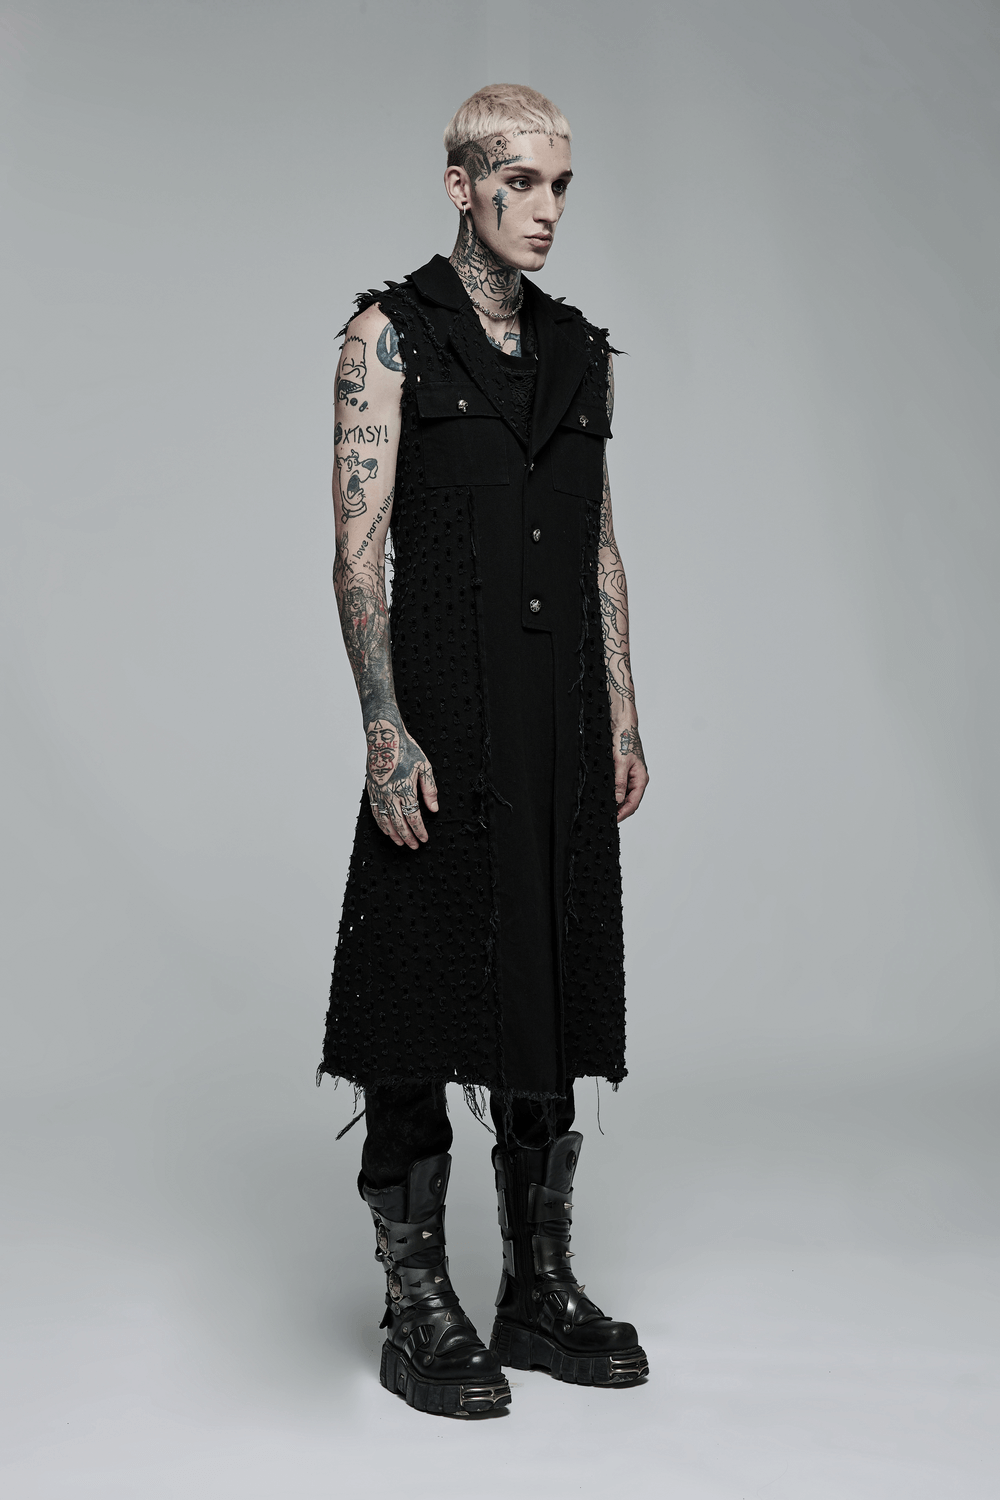 Edgy Punk Old Medium-Length Vest with Distressed Detailing - HARD'N'HEAVY